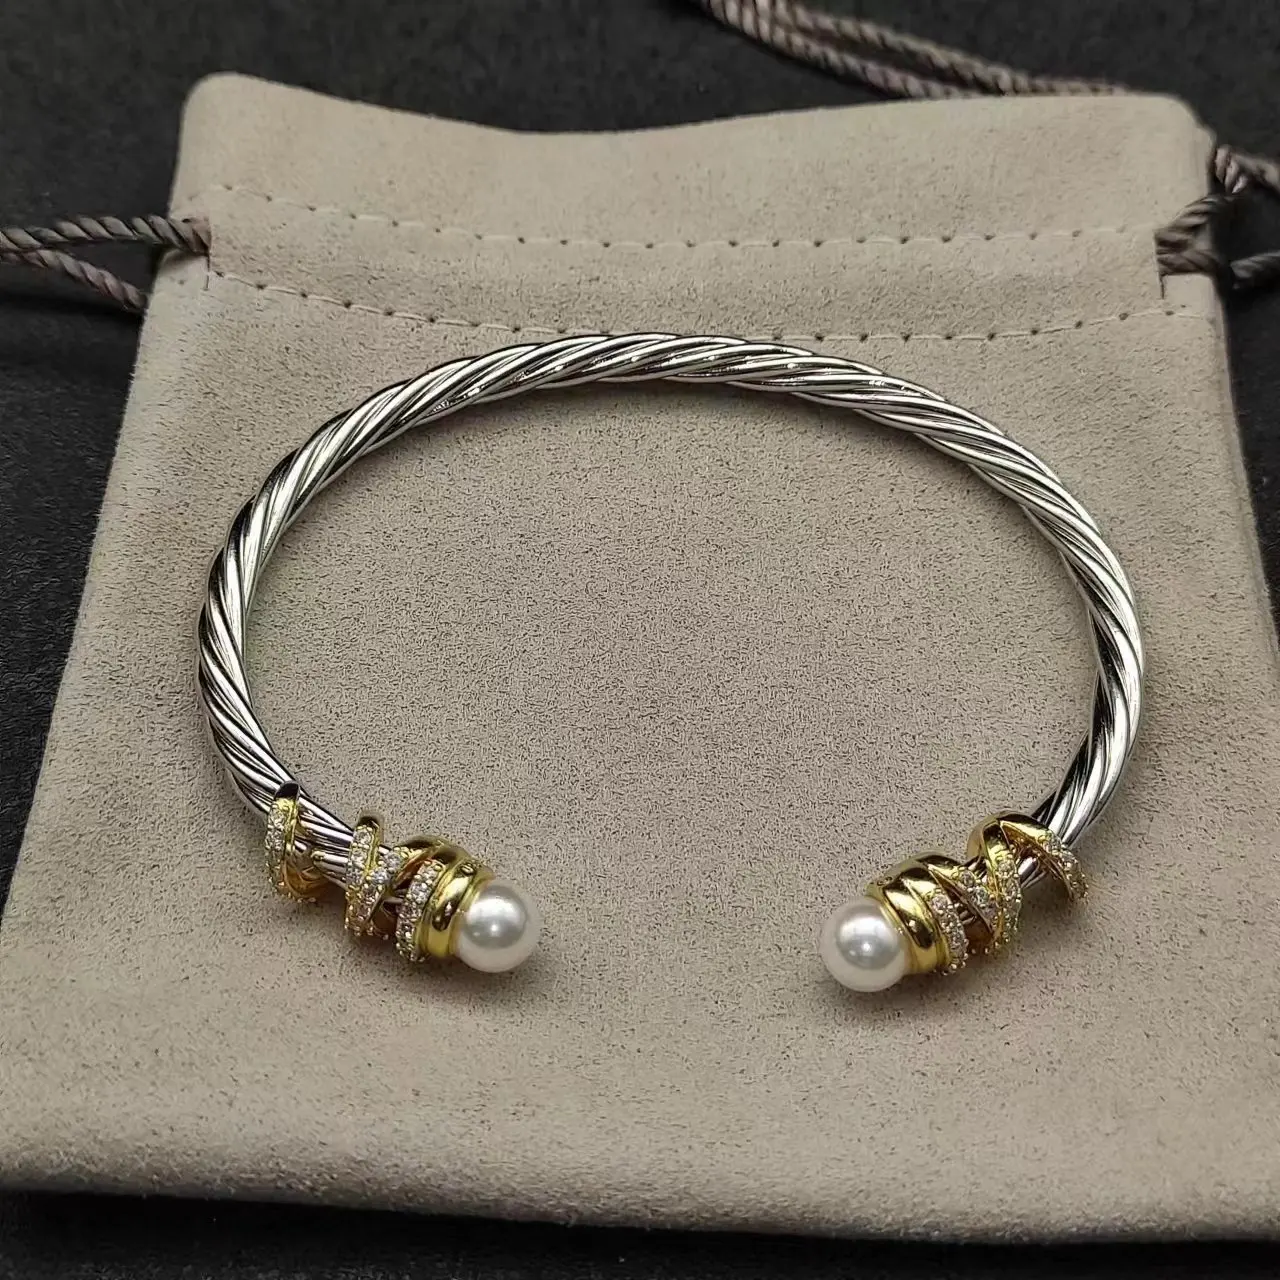 Twisted Cable Bracelet With Composite Shell Pearl 4mm Antique Cuff ...